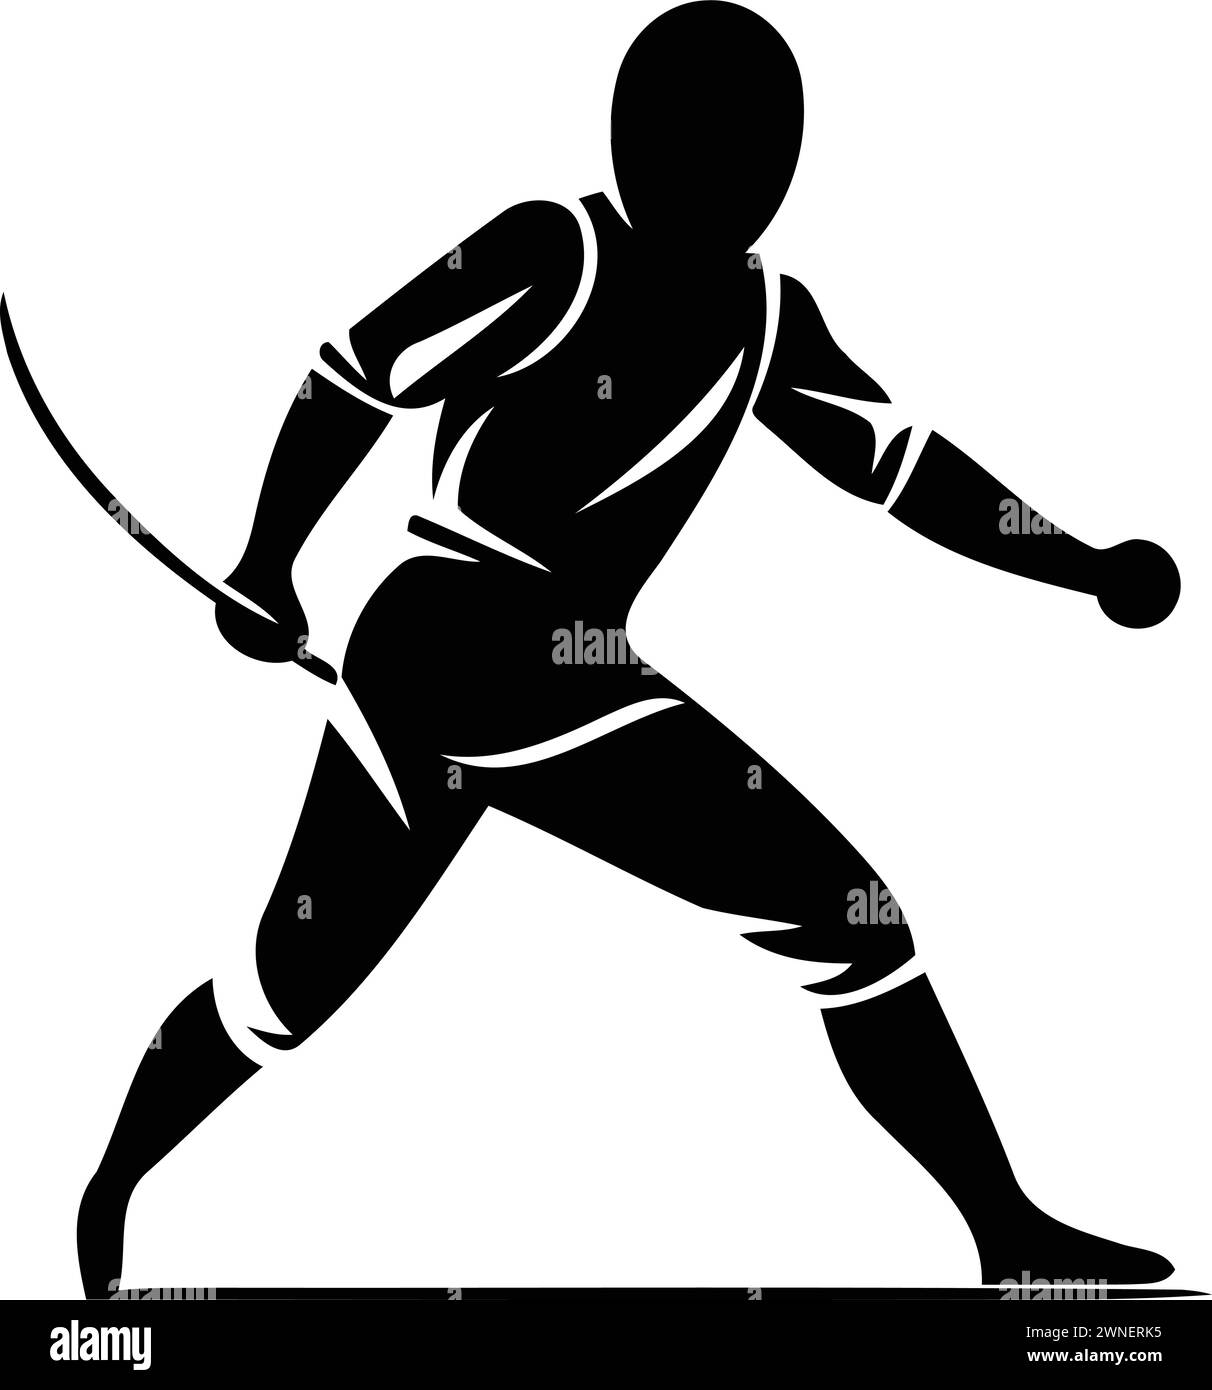 Silhouette of a fencer on a white background. Vector illustration Stock Vector